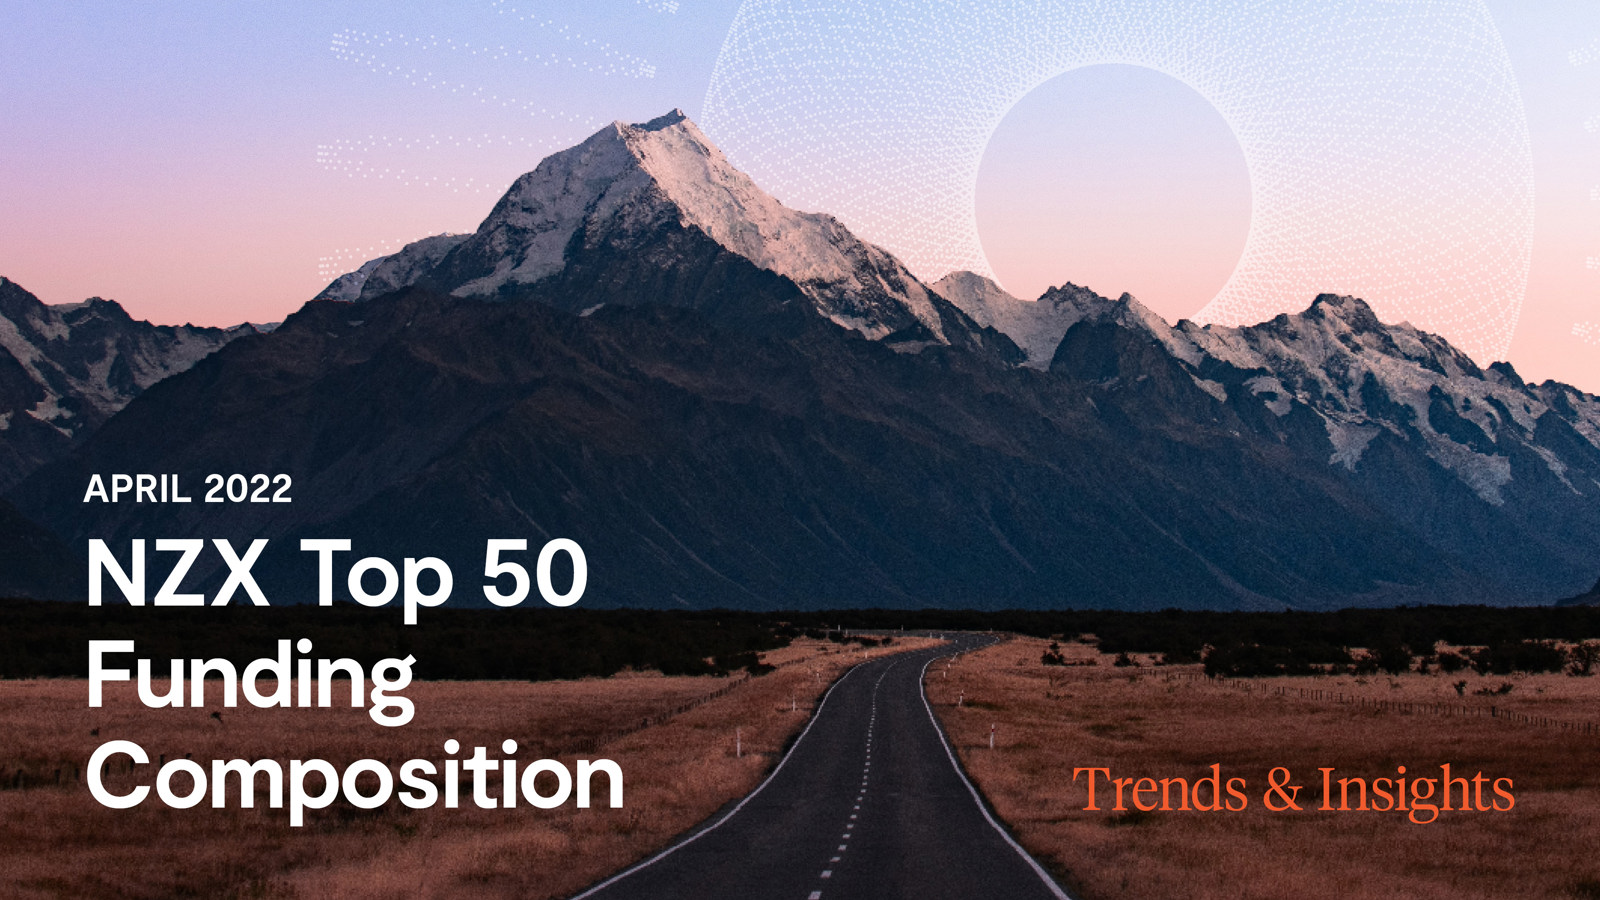 NZX Top 50 Funding Composition publication social post